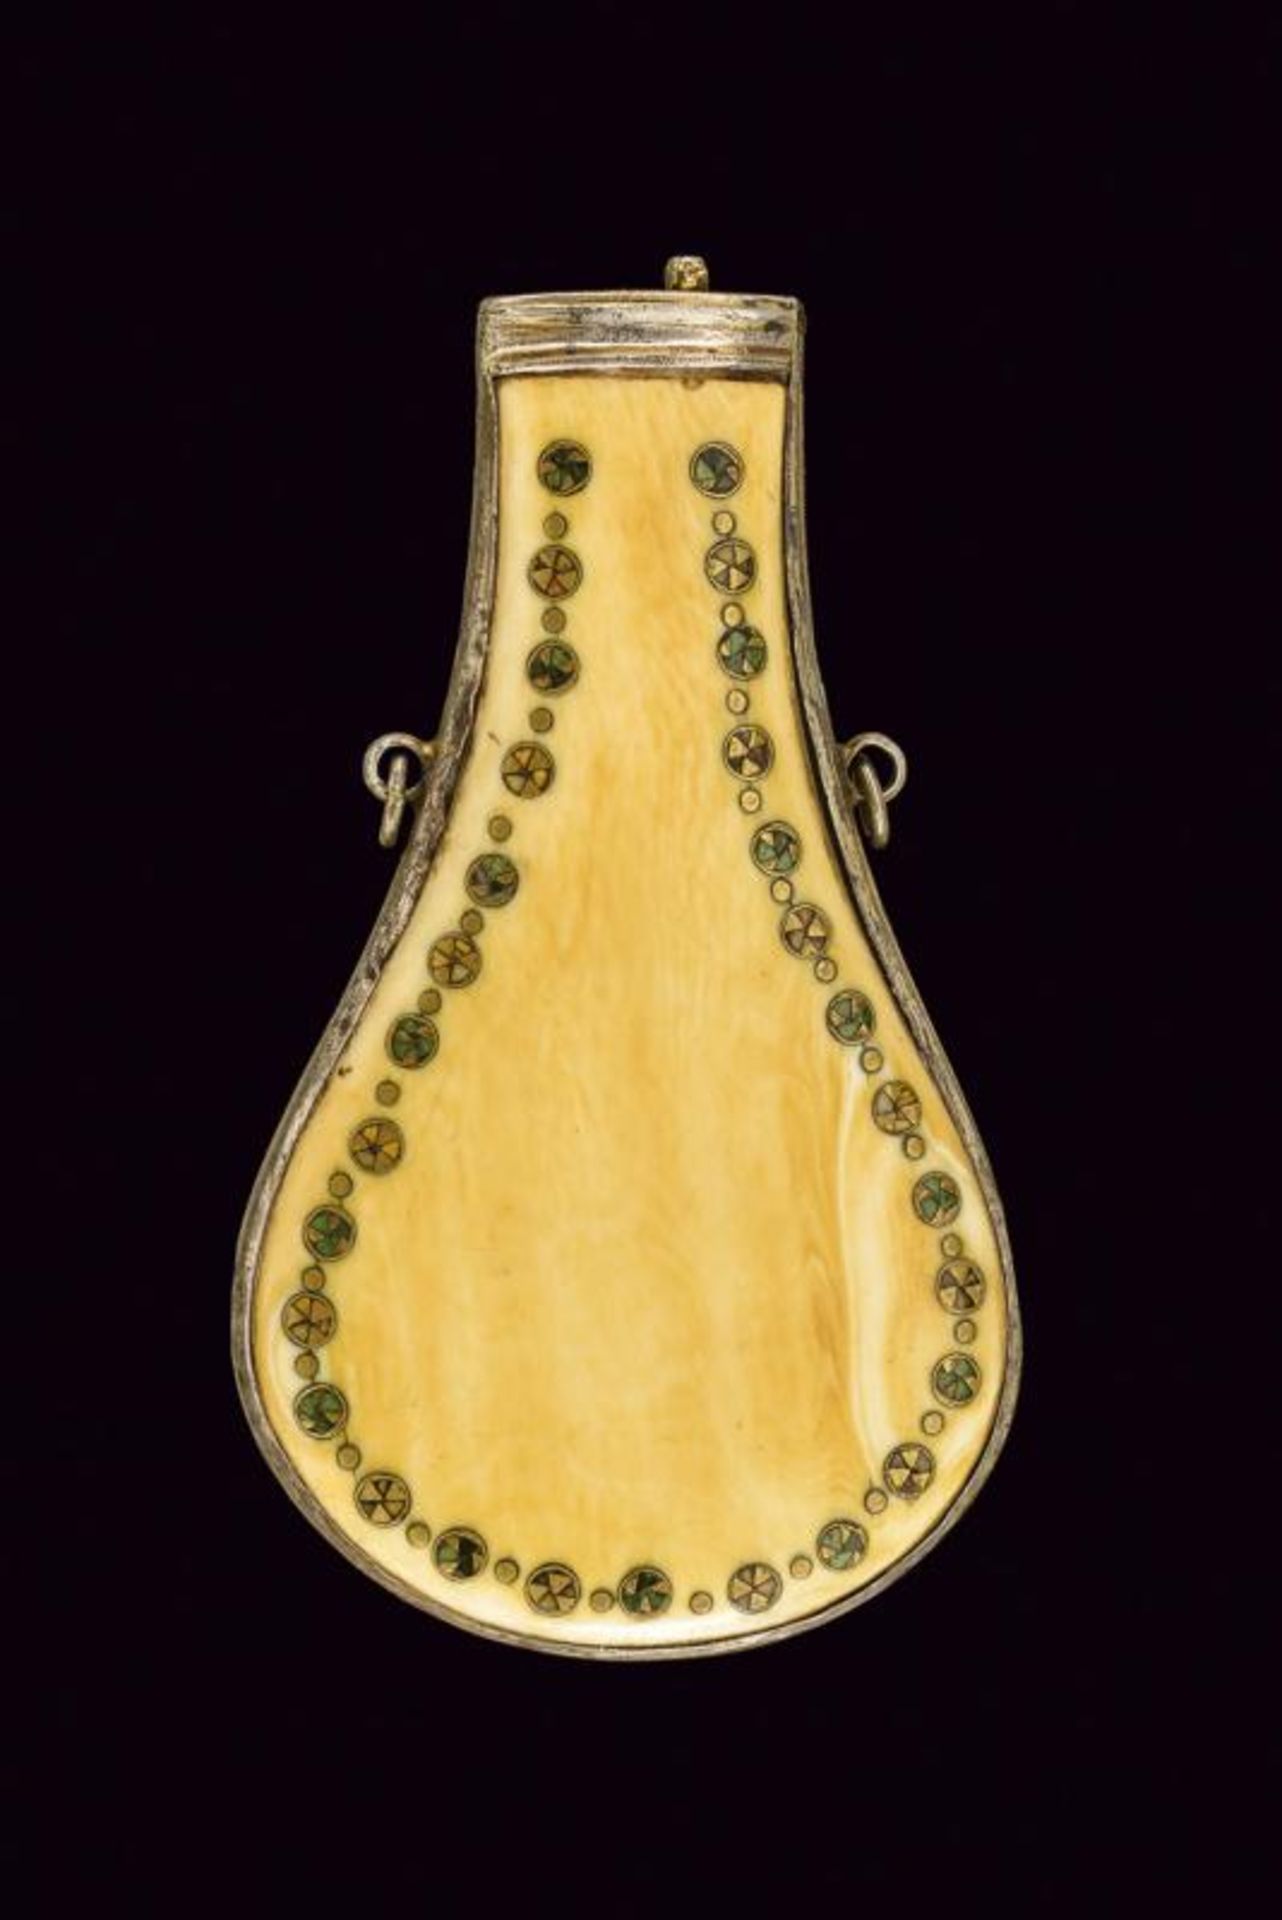 An ottoman rare decorated flask - Image 7 of 7